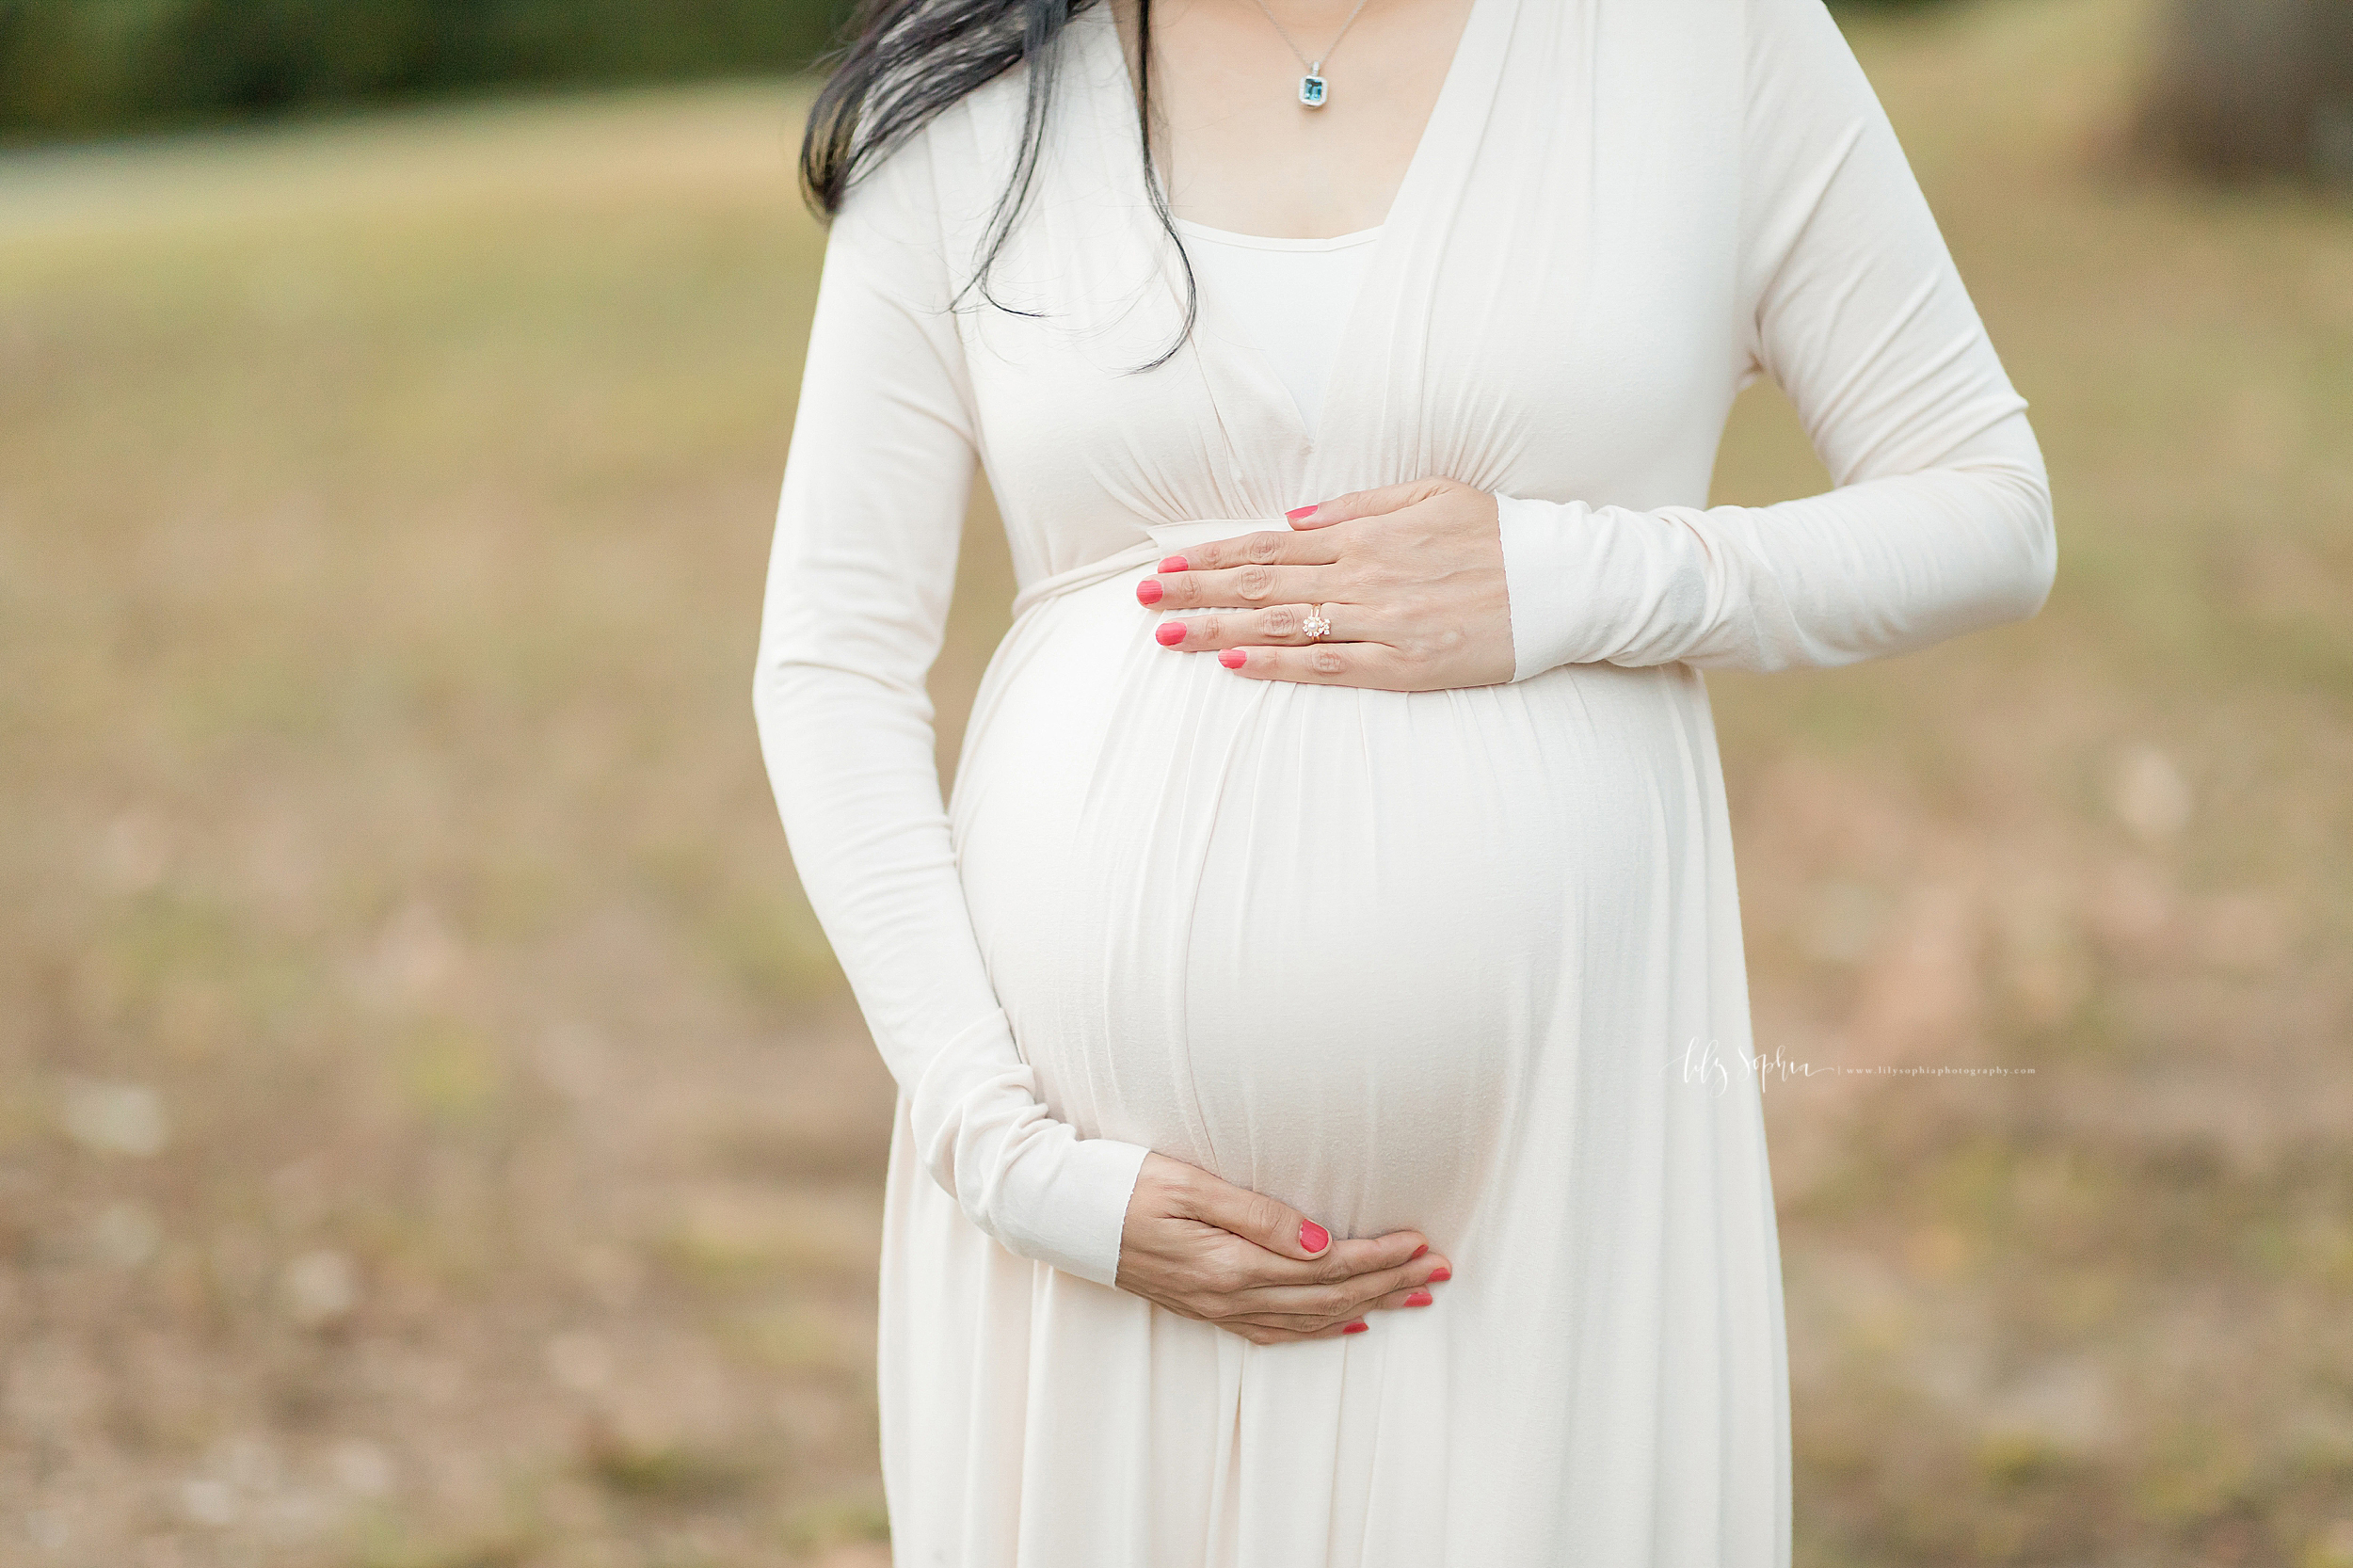 atlanta-midtown-lawrenceville-decatur-lily-sophia-photography-photographer-indian-couple-maternity-photos-expecting-baby-girl_0200.jpg